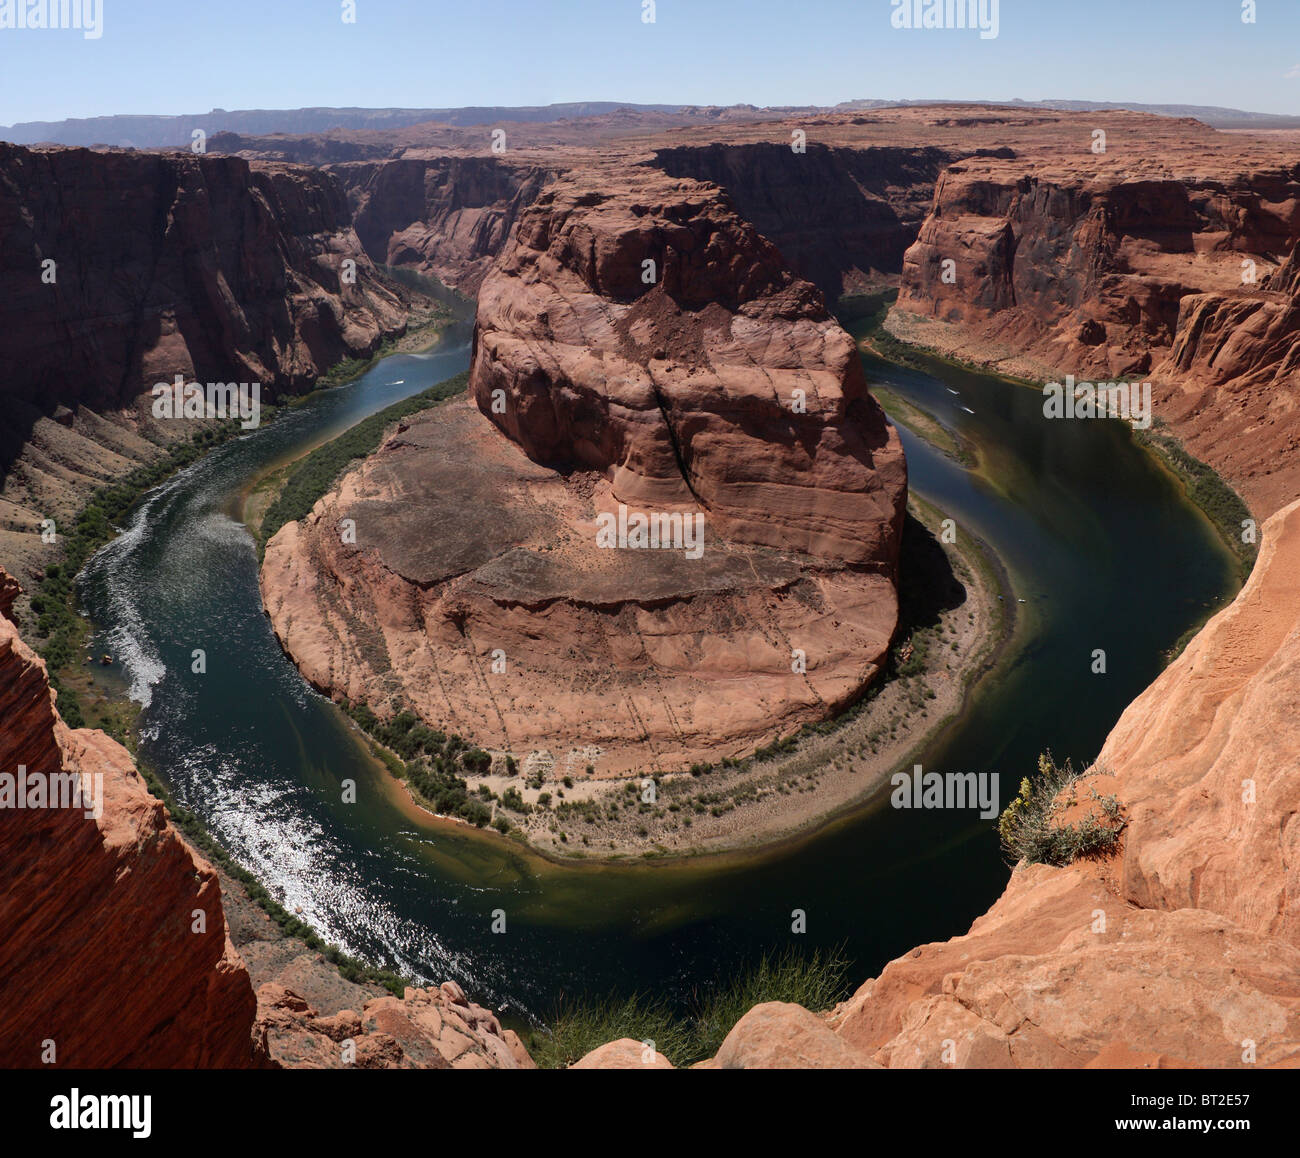 Colorado River in the bottom of the canyon at Horseshoe Bend in Arizona, USA. Stock Photo